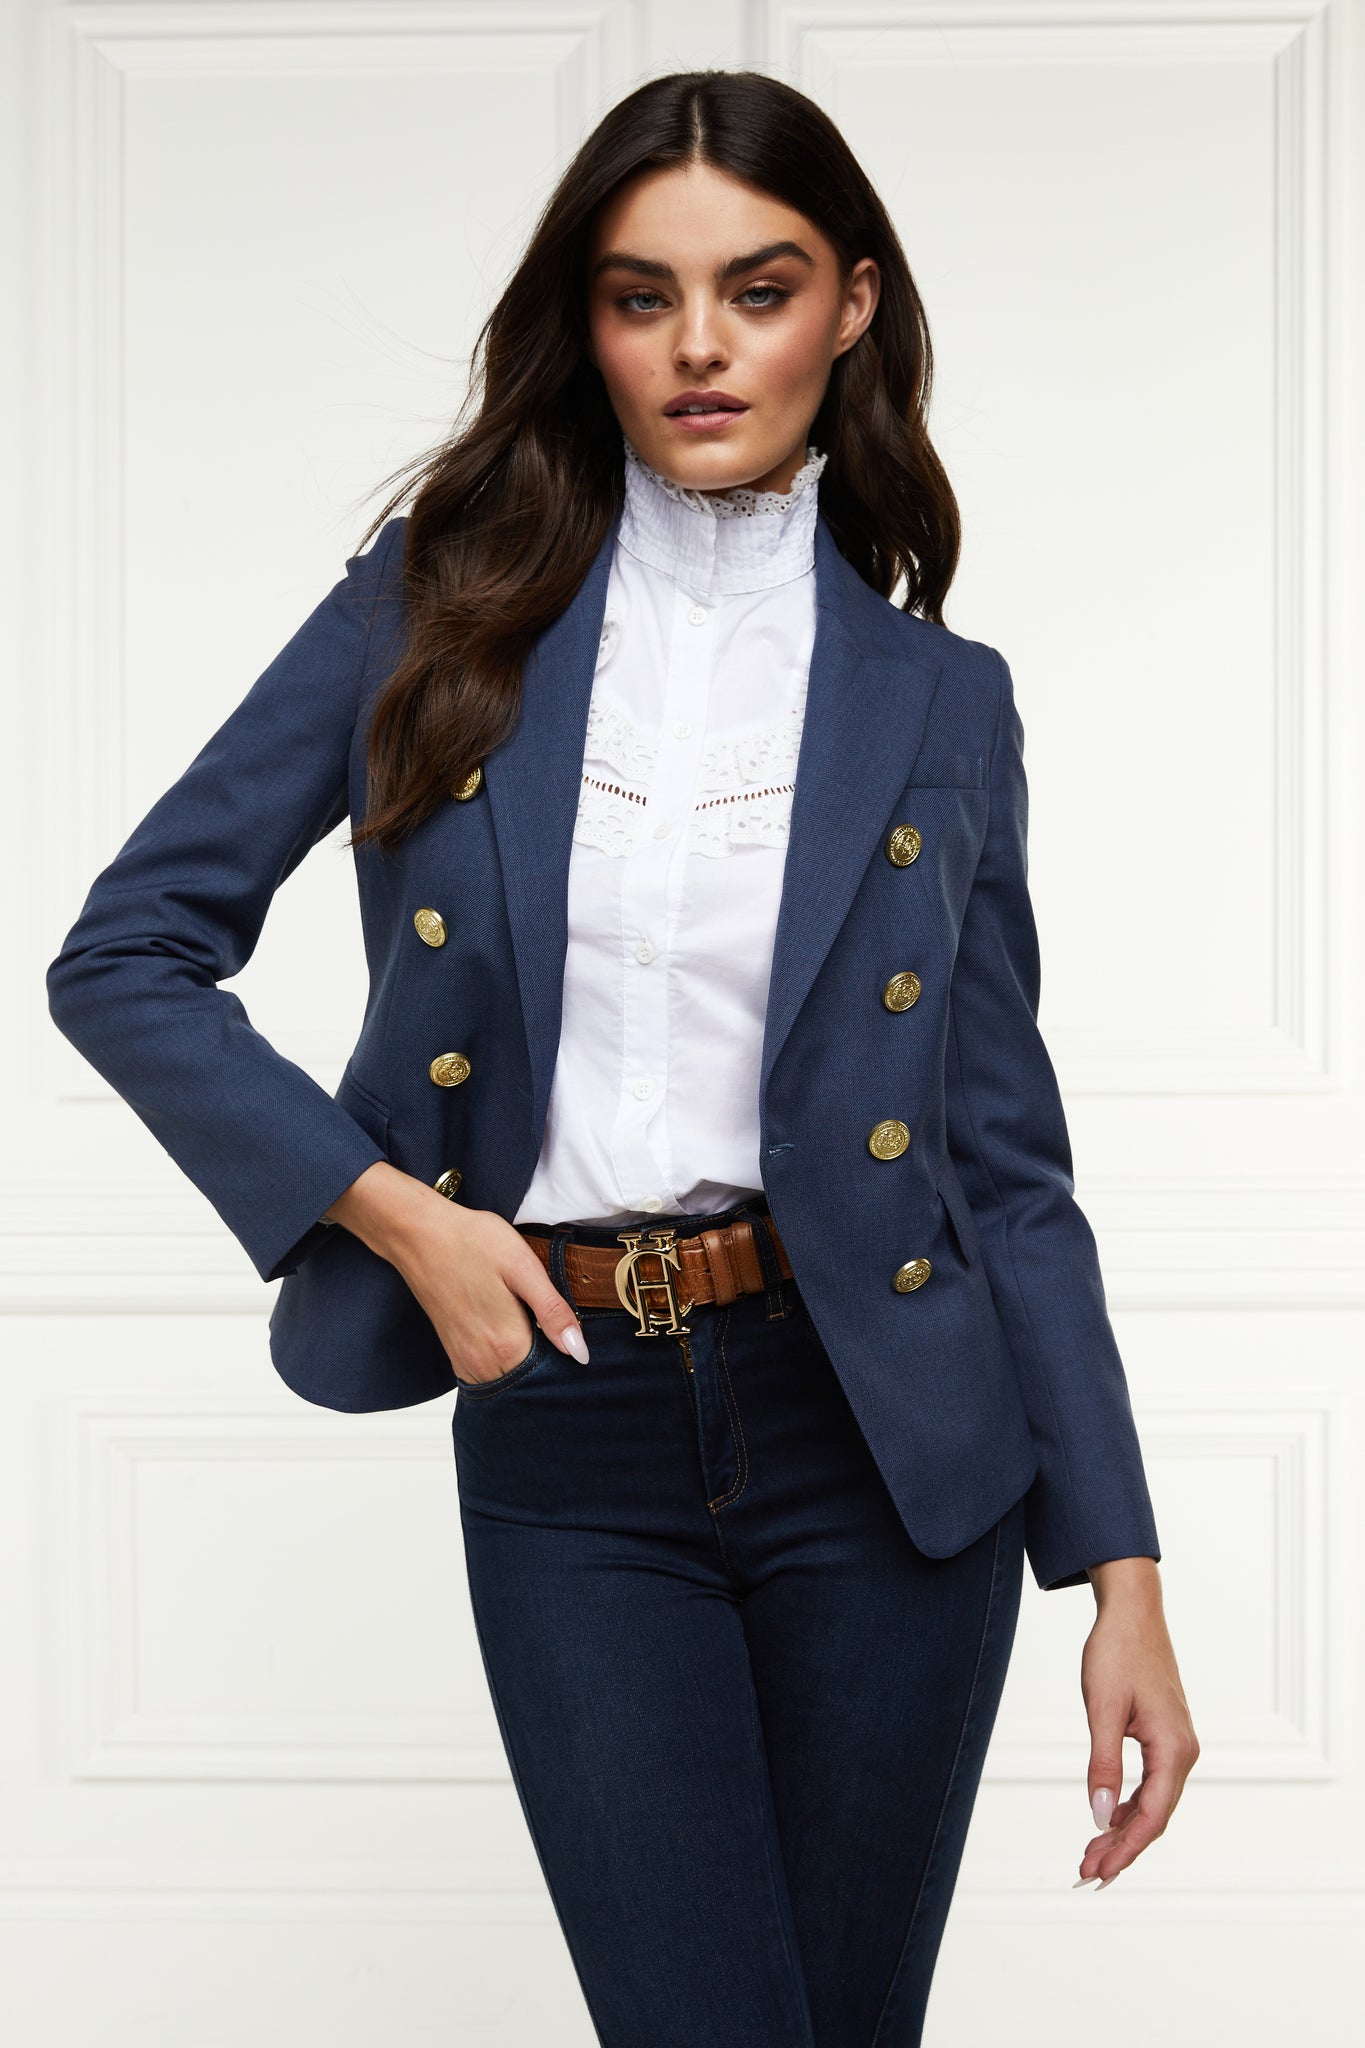 British made double breasted blazer that fastens with a single button hole to create a more form fitting silhouette with two pockets and gold button detailing this blazer in denim